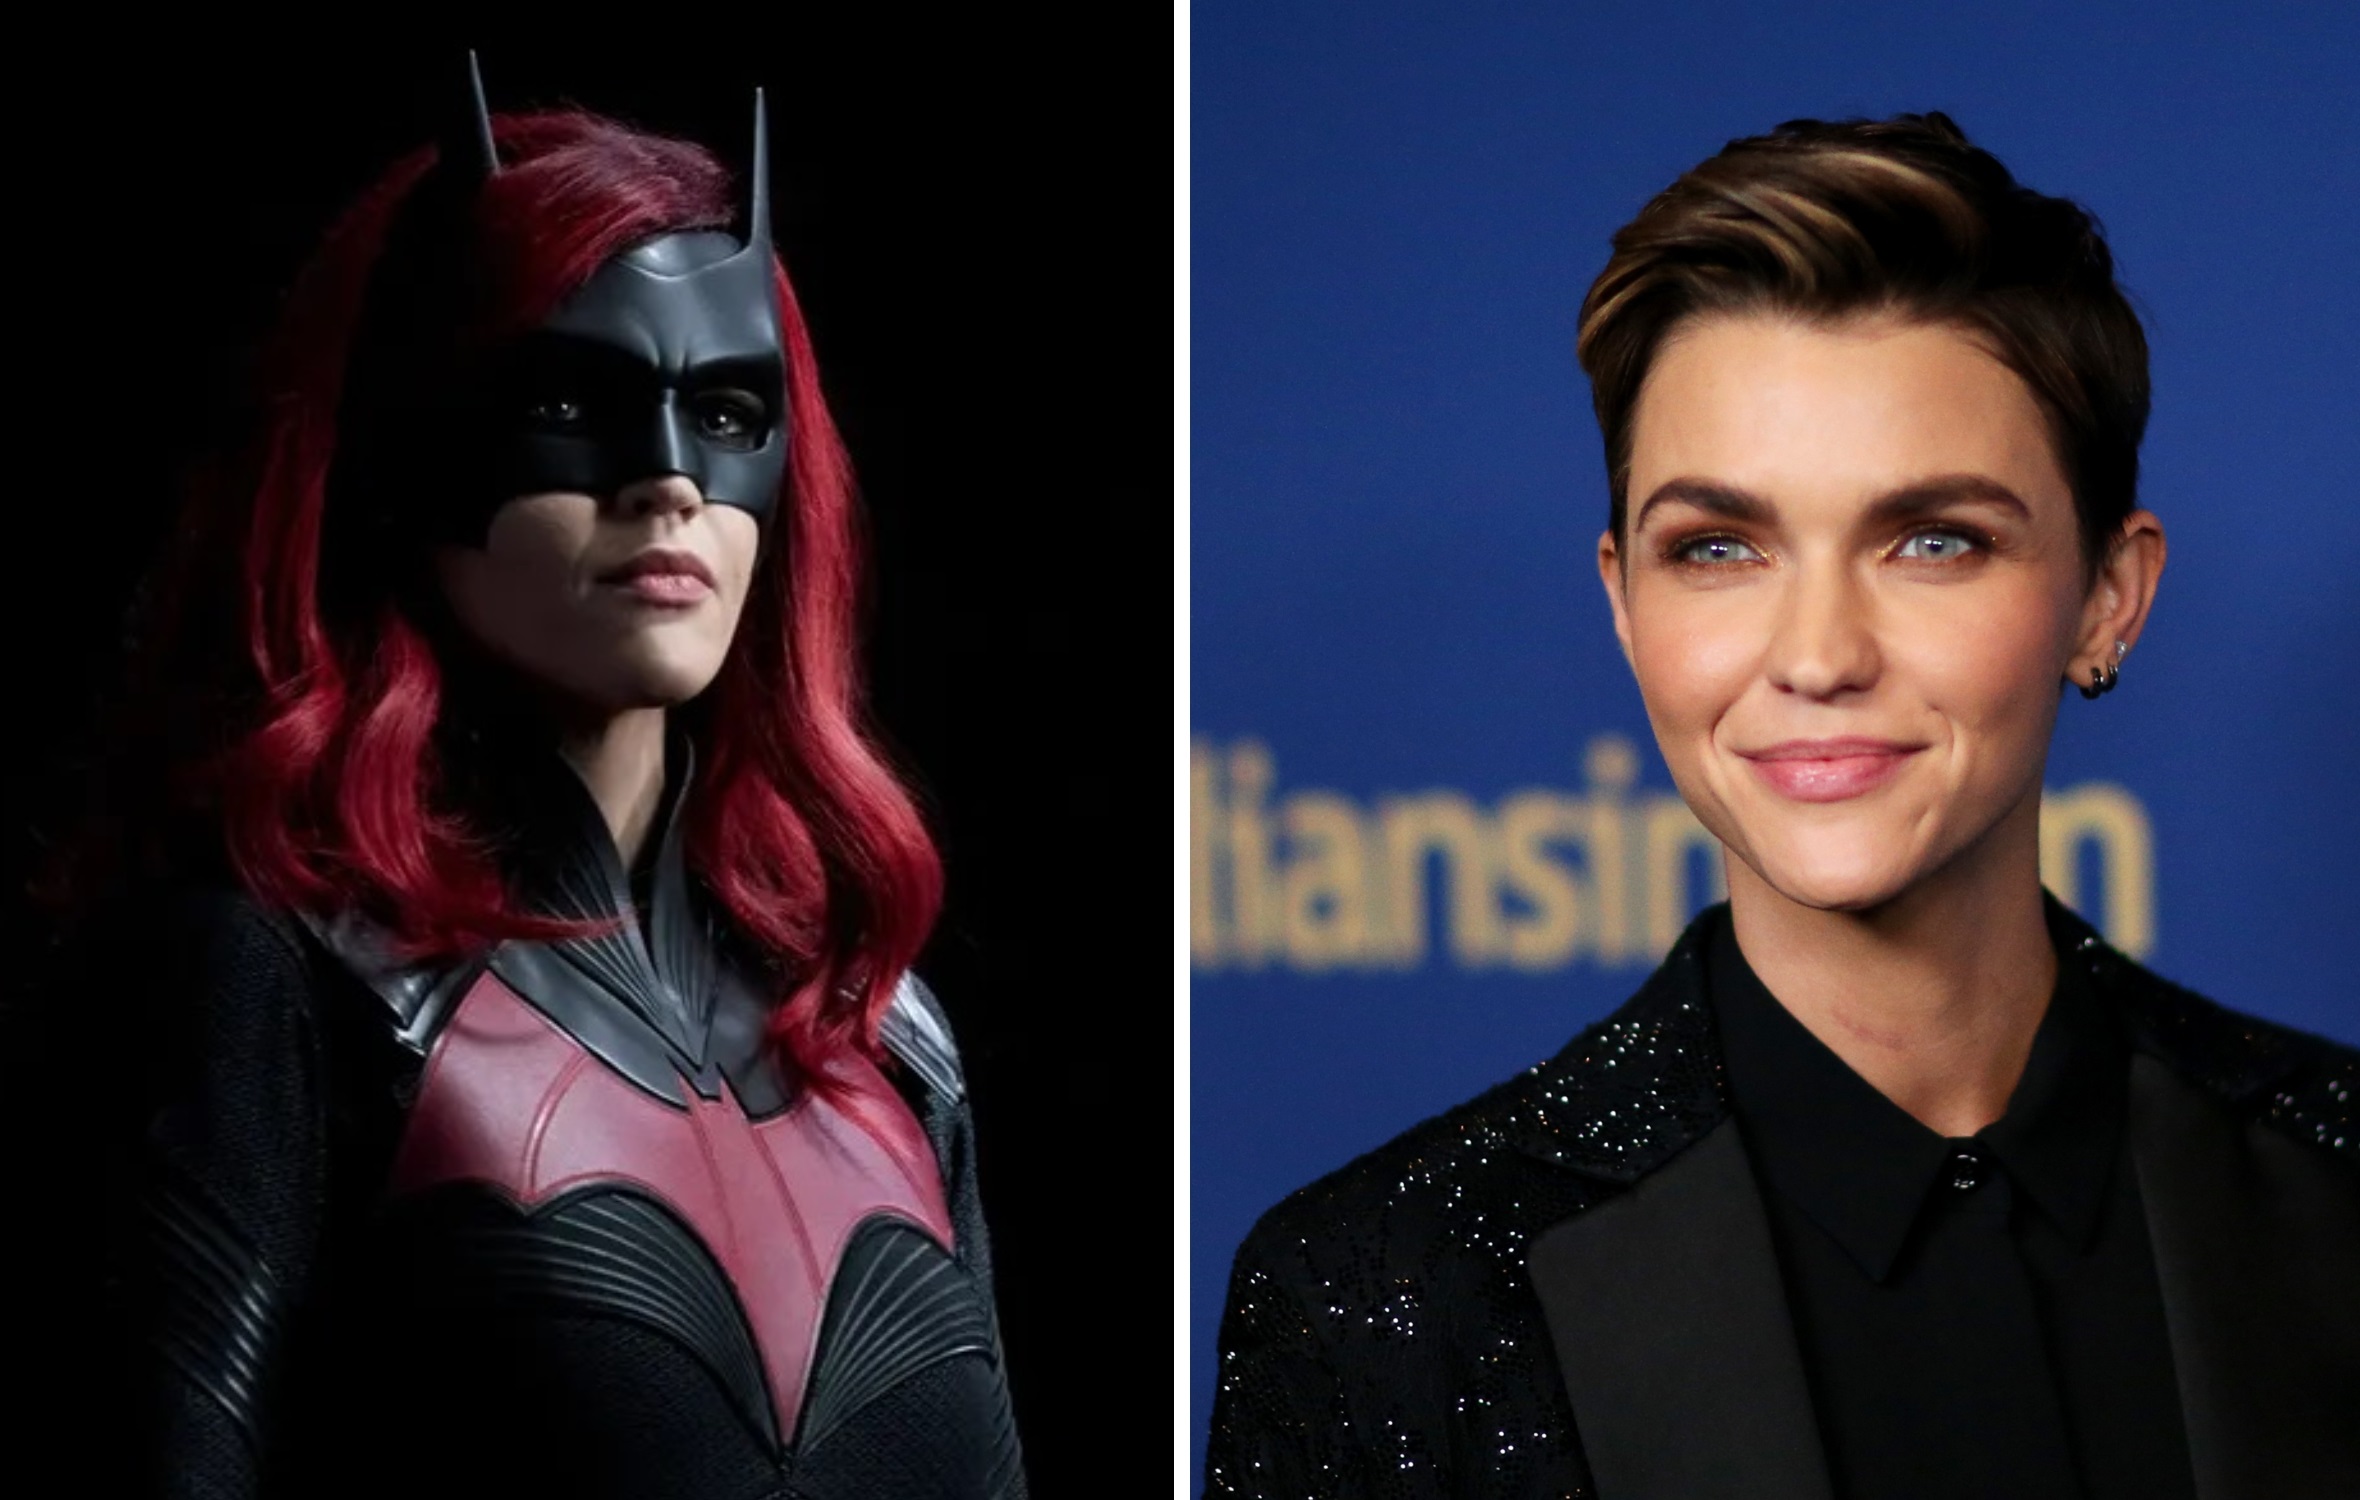 Warner Bros confirmed the news about Ruby Rose getting fired. Ruby Rose who is known for her work in the popular TV show Orange Is The New Black, got fired from Batwoman. One of the most popular spin-offs produced by DC Entertainment and Warner Bros featured Roby as the original protagonist of the show. Ruby played Kate Kane for a single season. In May 2020 she was fired from the show after she complained that the set was unsafe and toxic. However, Warner Bros didn't care and re-wrote the whole show.